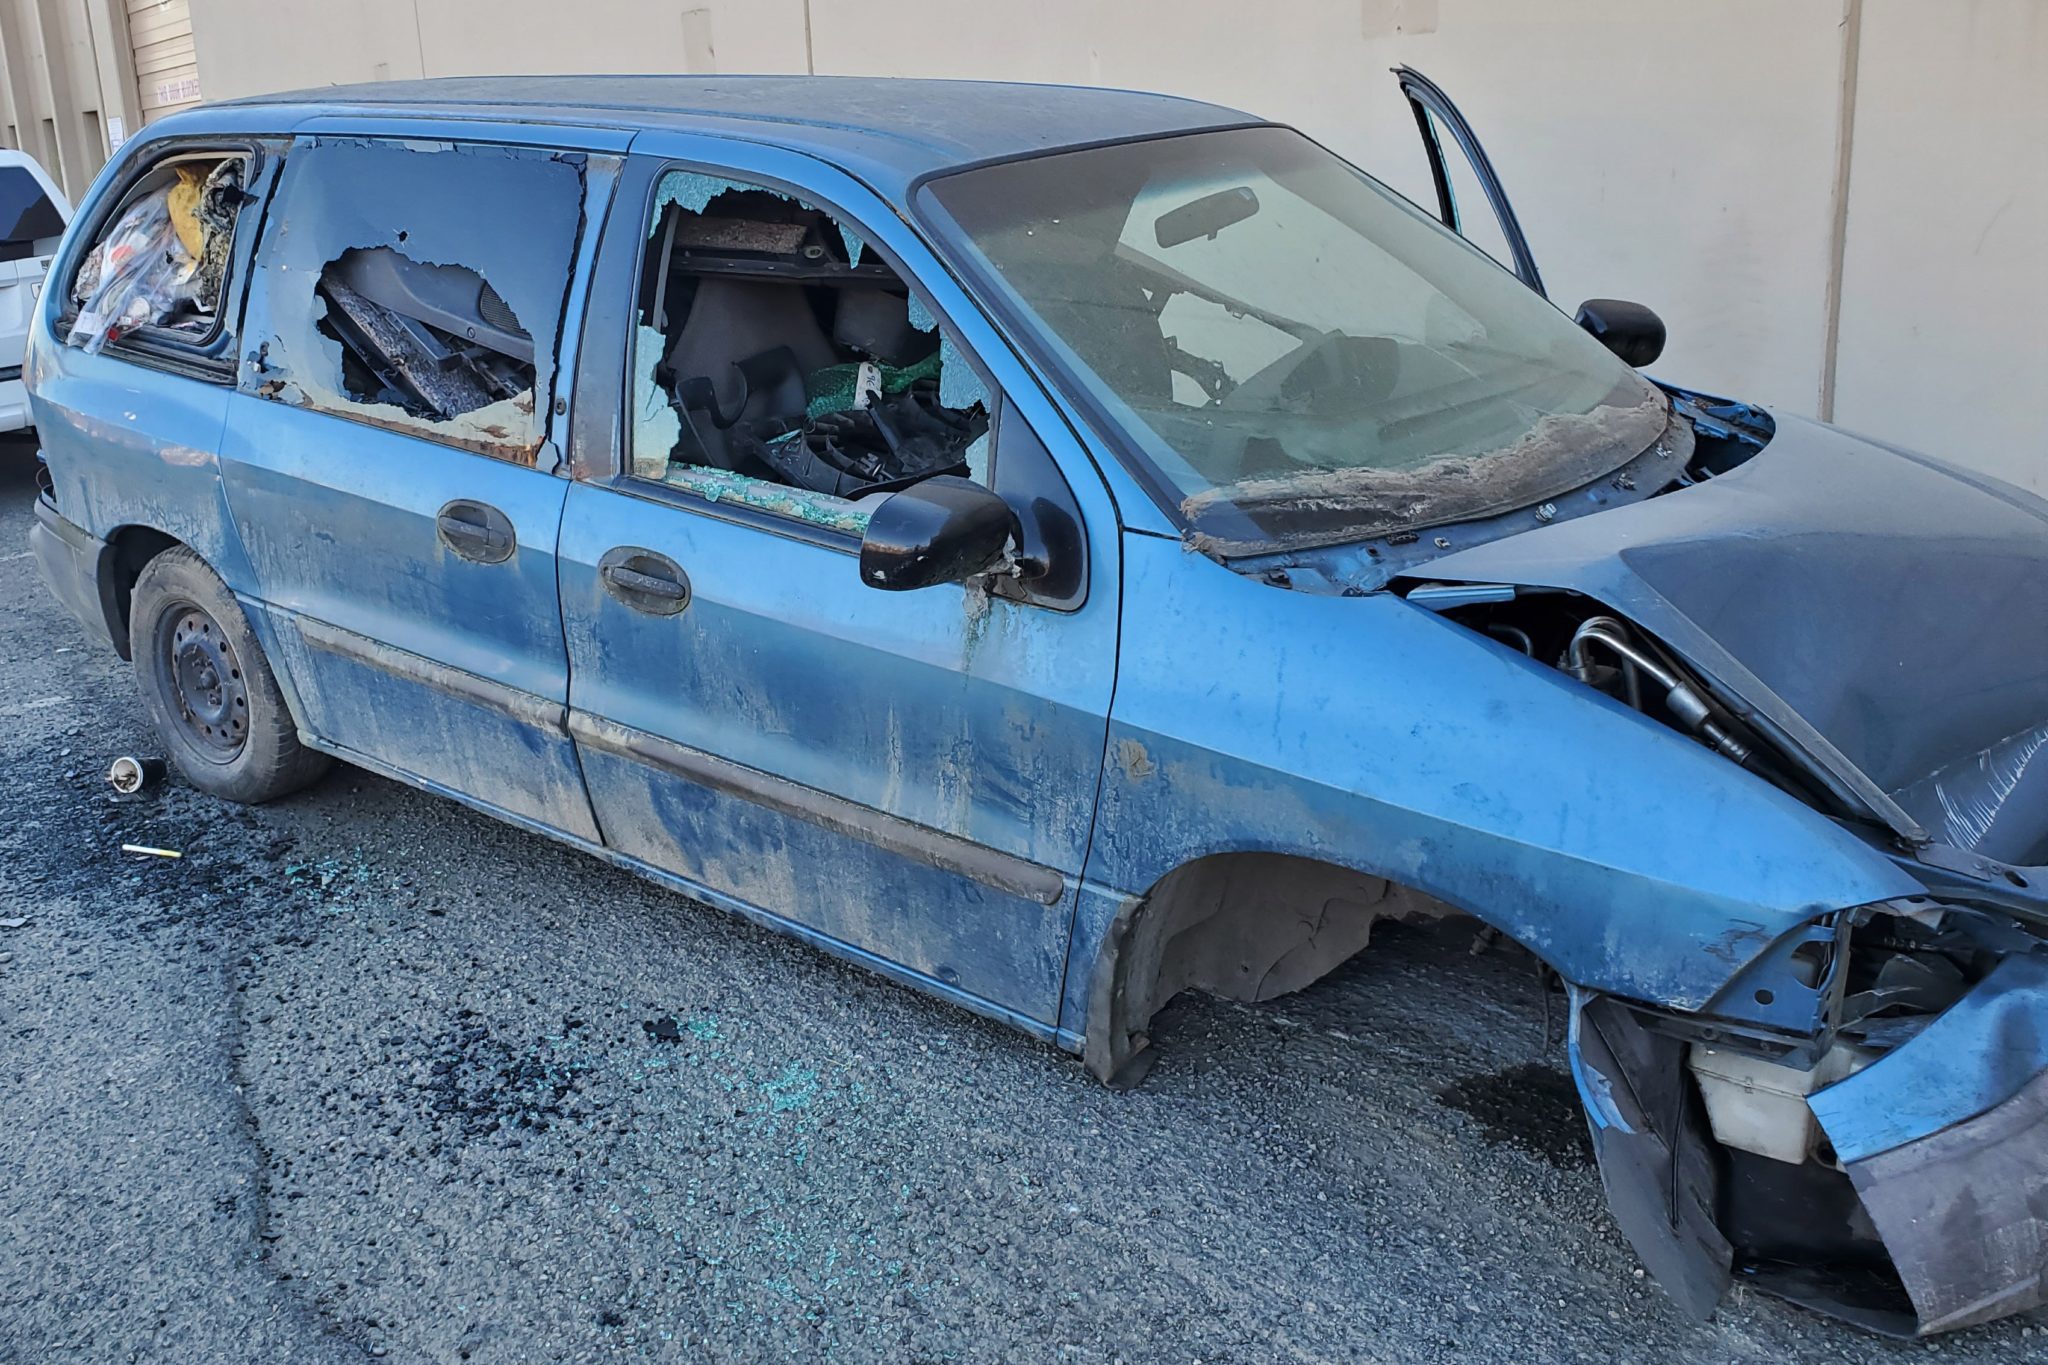 A blue abandoned vehicle pictured on a street in the City of Seattle. The vehicle's wheels are missing and the driver's side door is open.